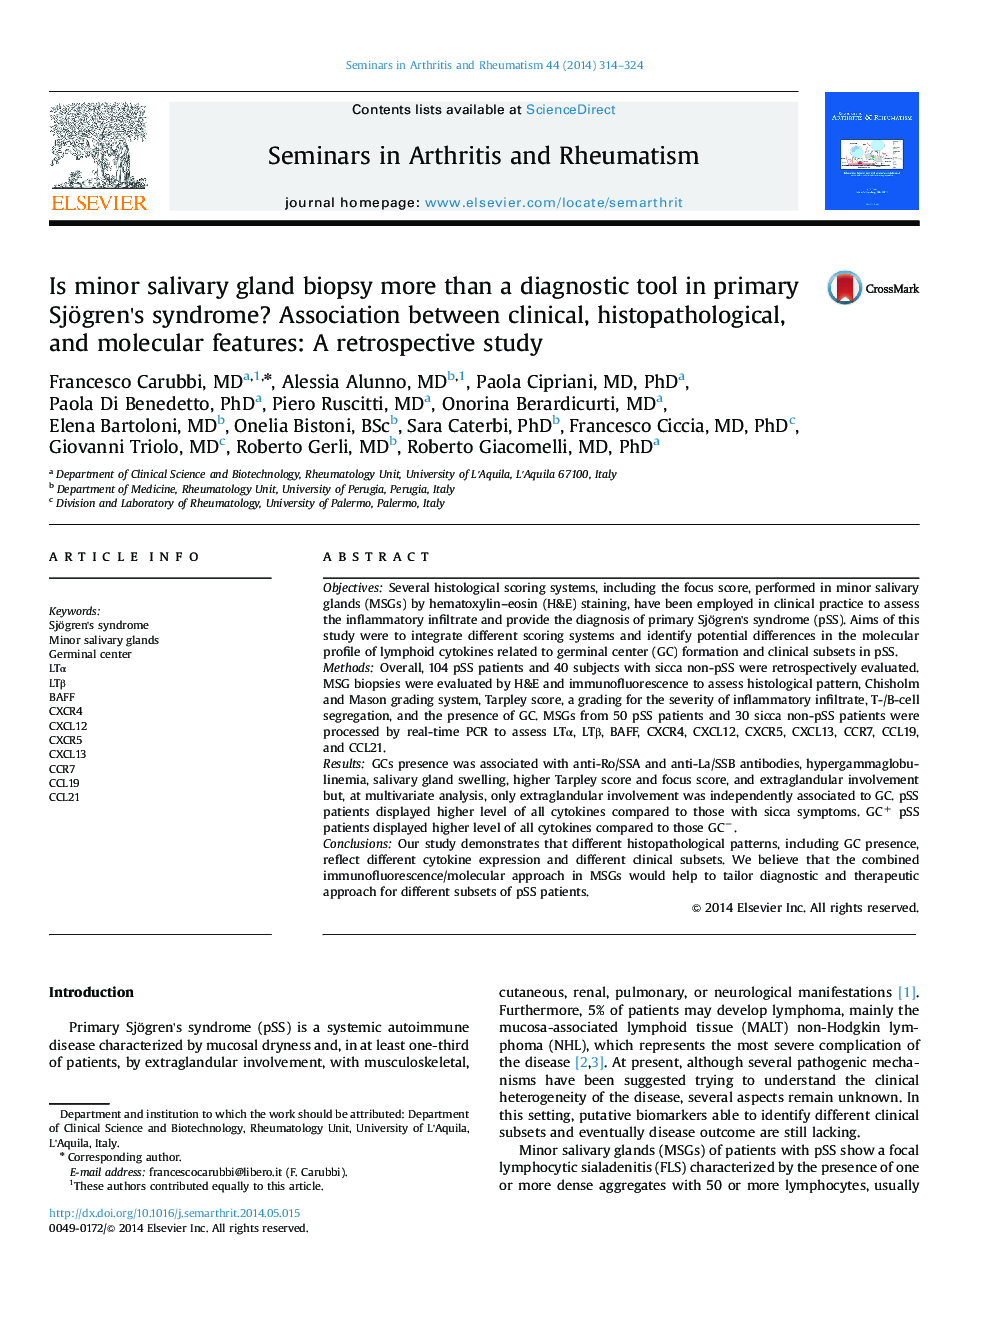 Is minor salivary gland biopsy more than a diagnostic tool in primary SjoÂ¨gren×³s syndrome? Association between clinical, histopathological, and molecular features: A retrospective study